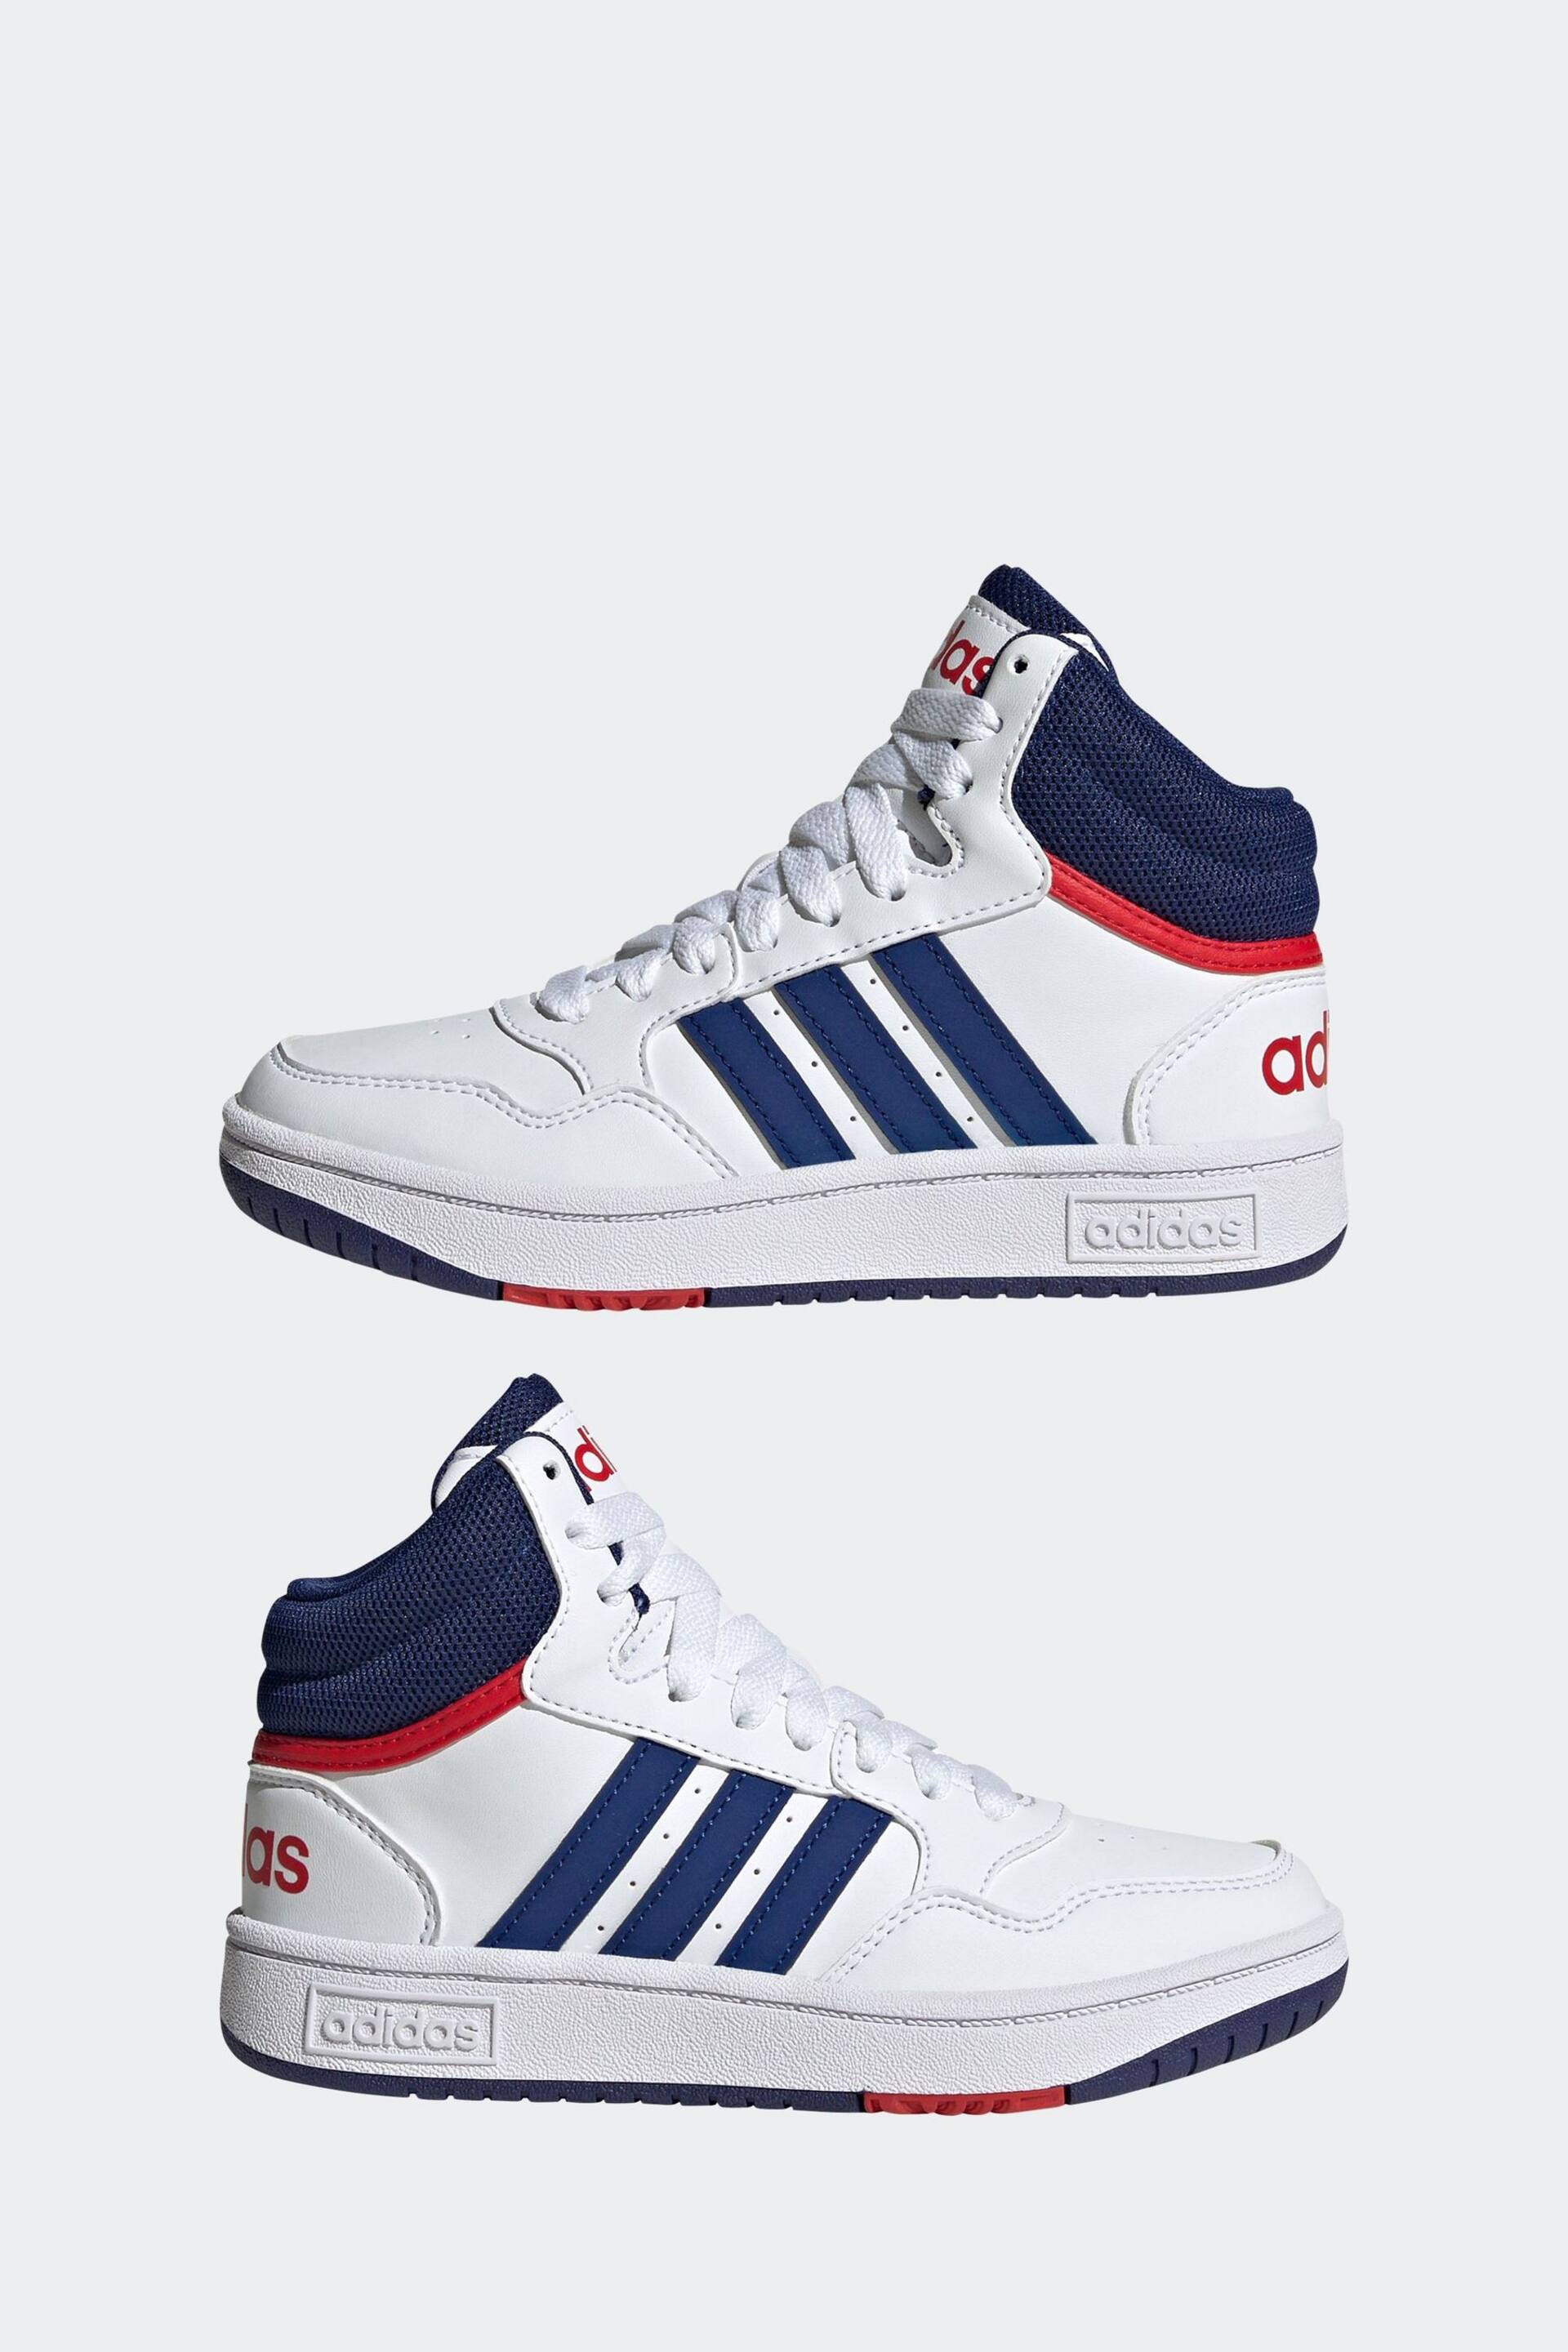 adidas White/Blue Hoops Mid Shoes - Image 5 of 9